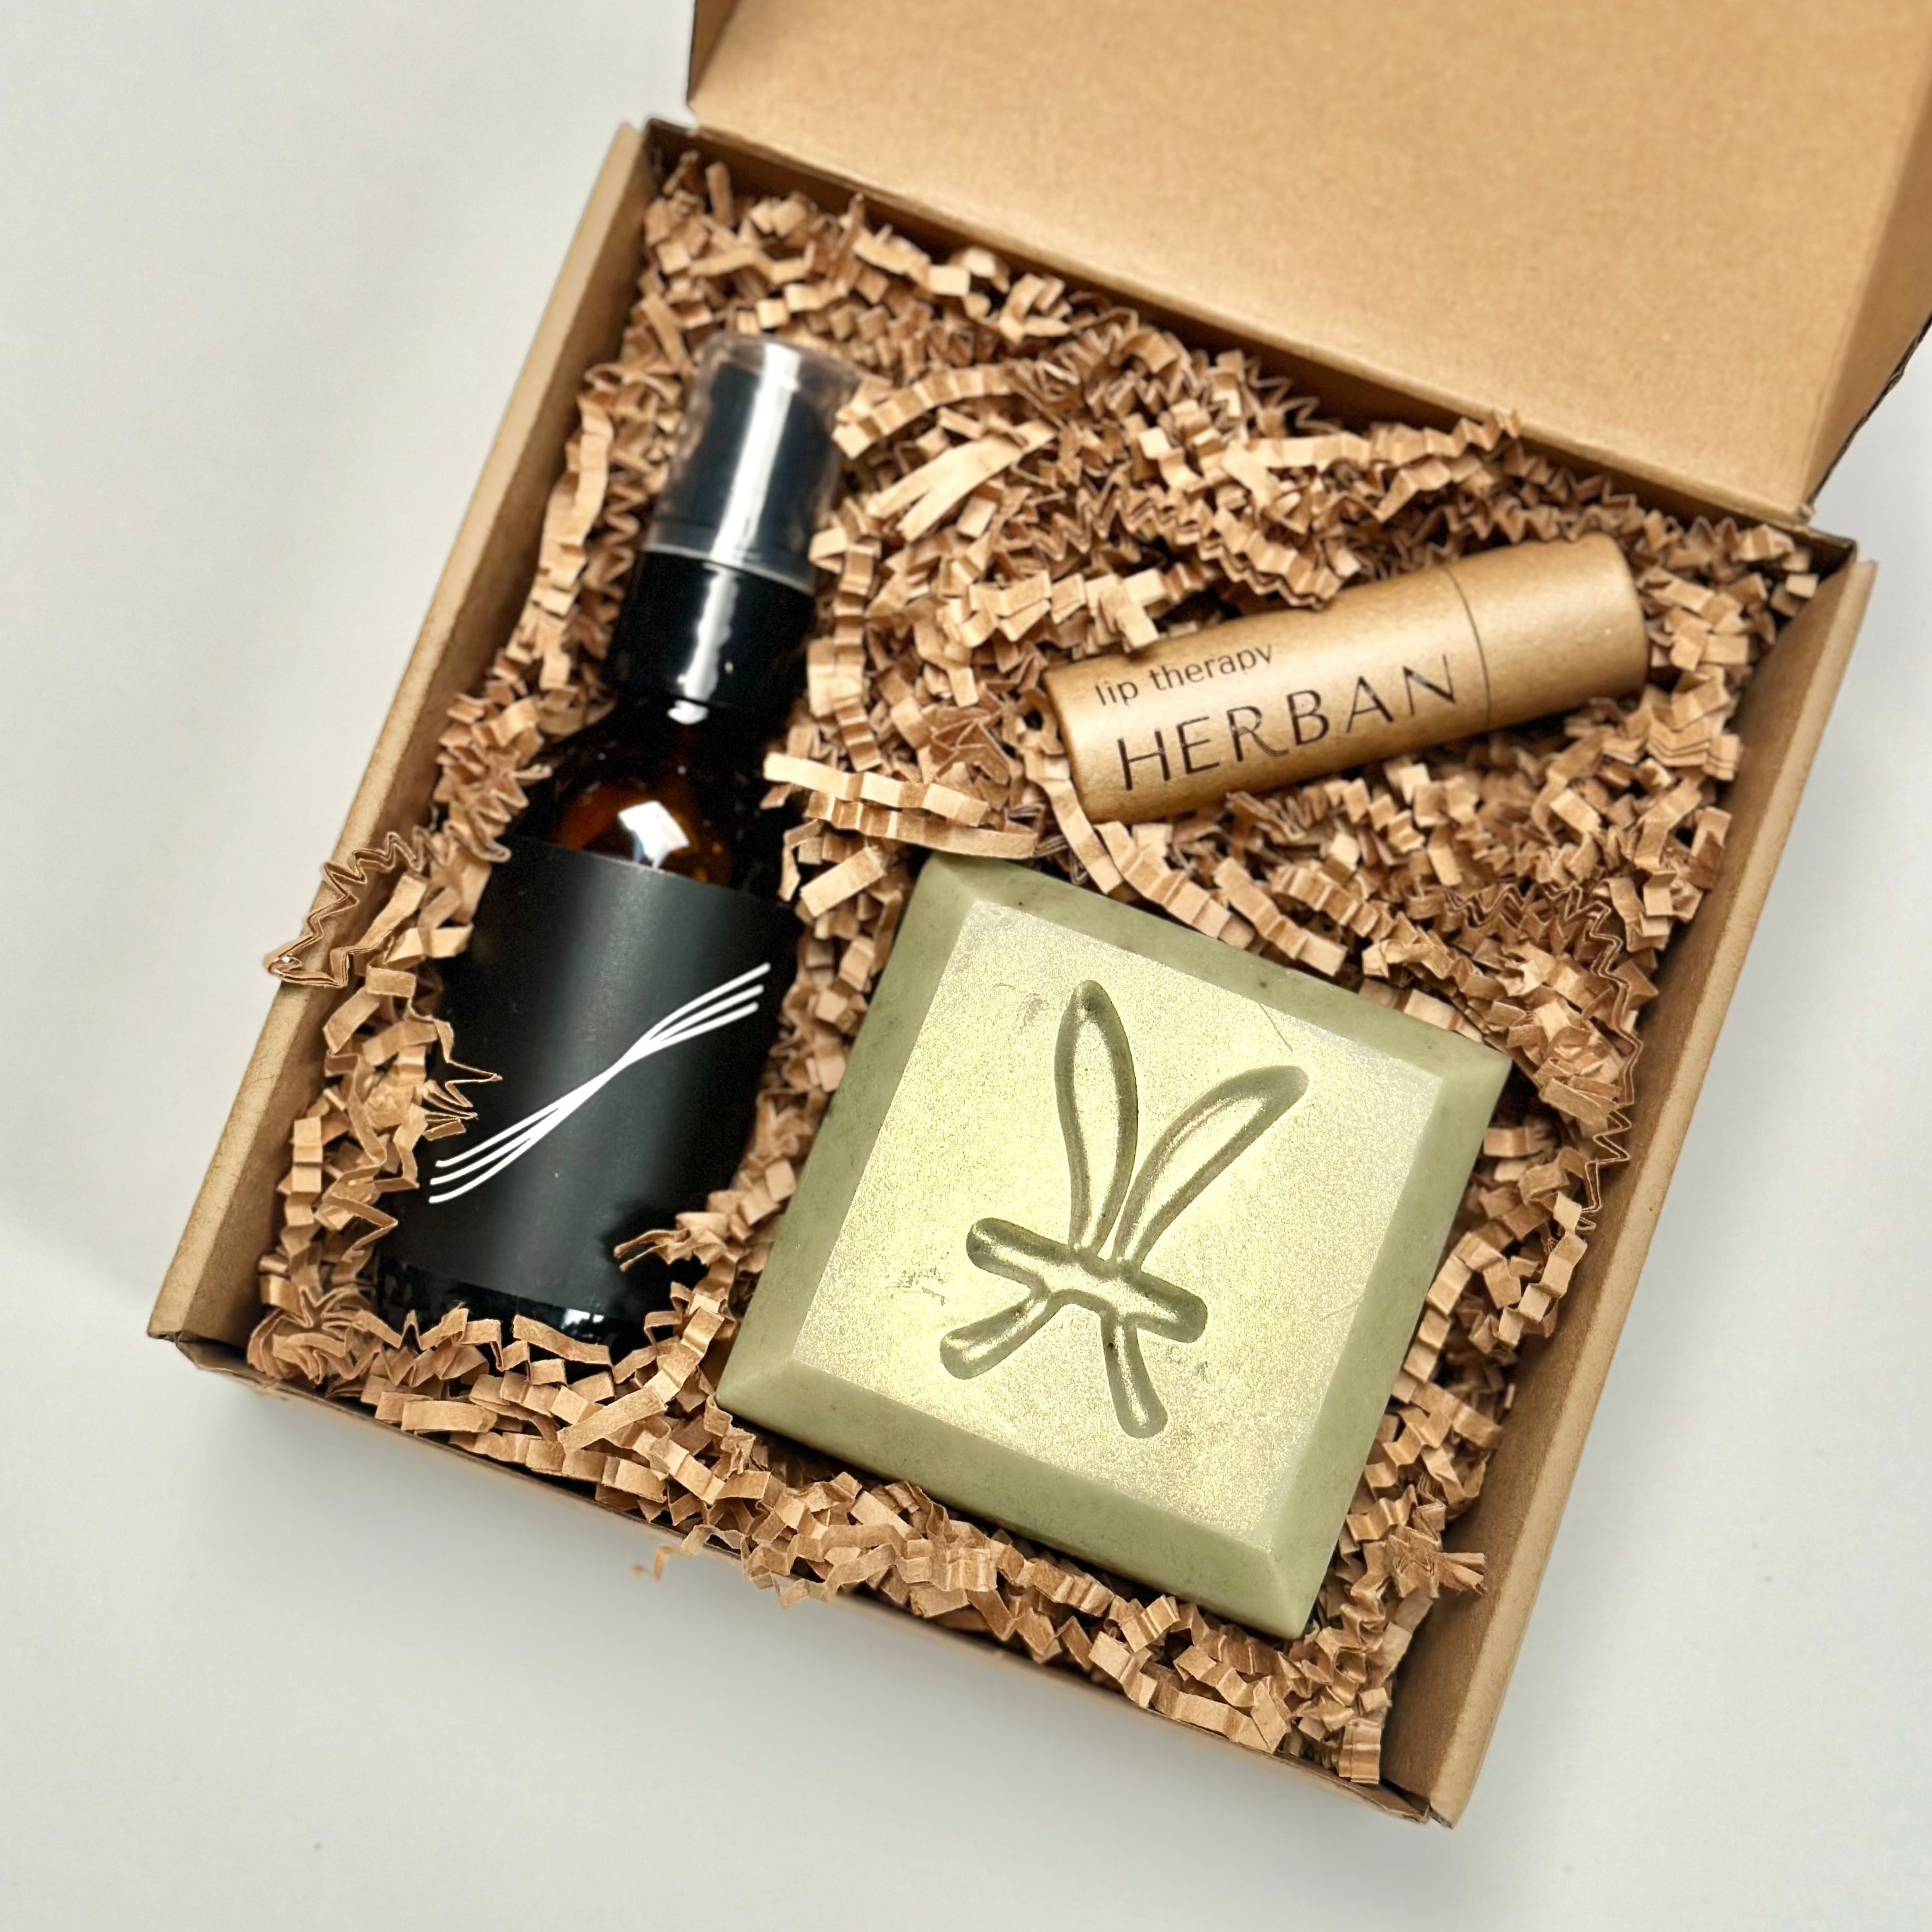 A flat kraft tuck top box filled with a 2oz amber glass hand sanitizer gel bottle with pump, a green square and beveled edge soap bar and a paper tube packaged lip balm